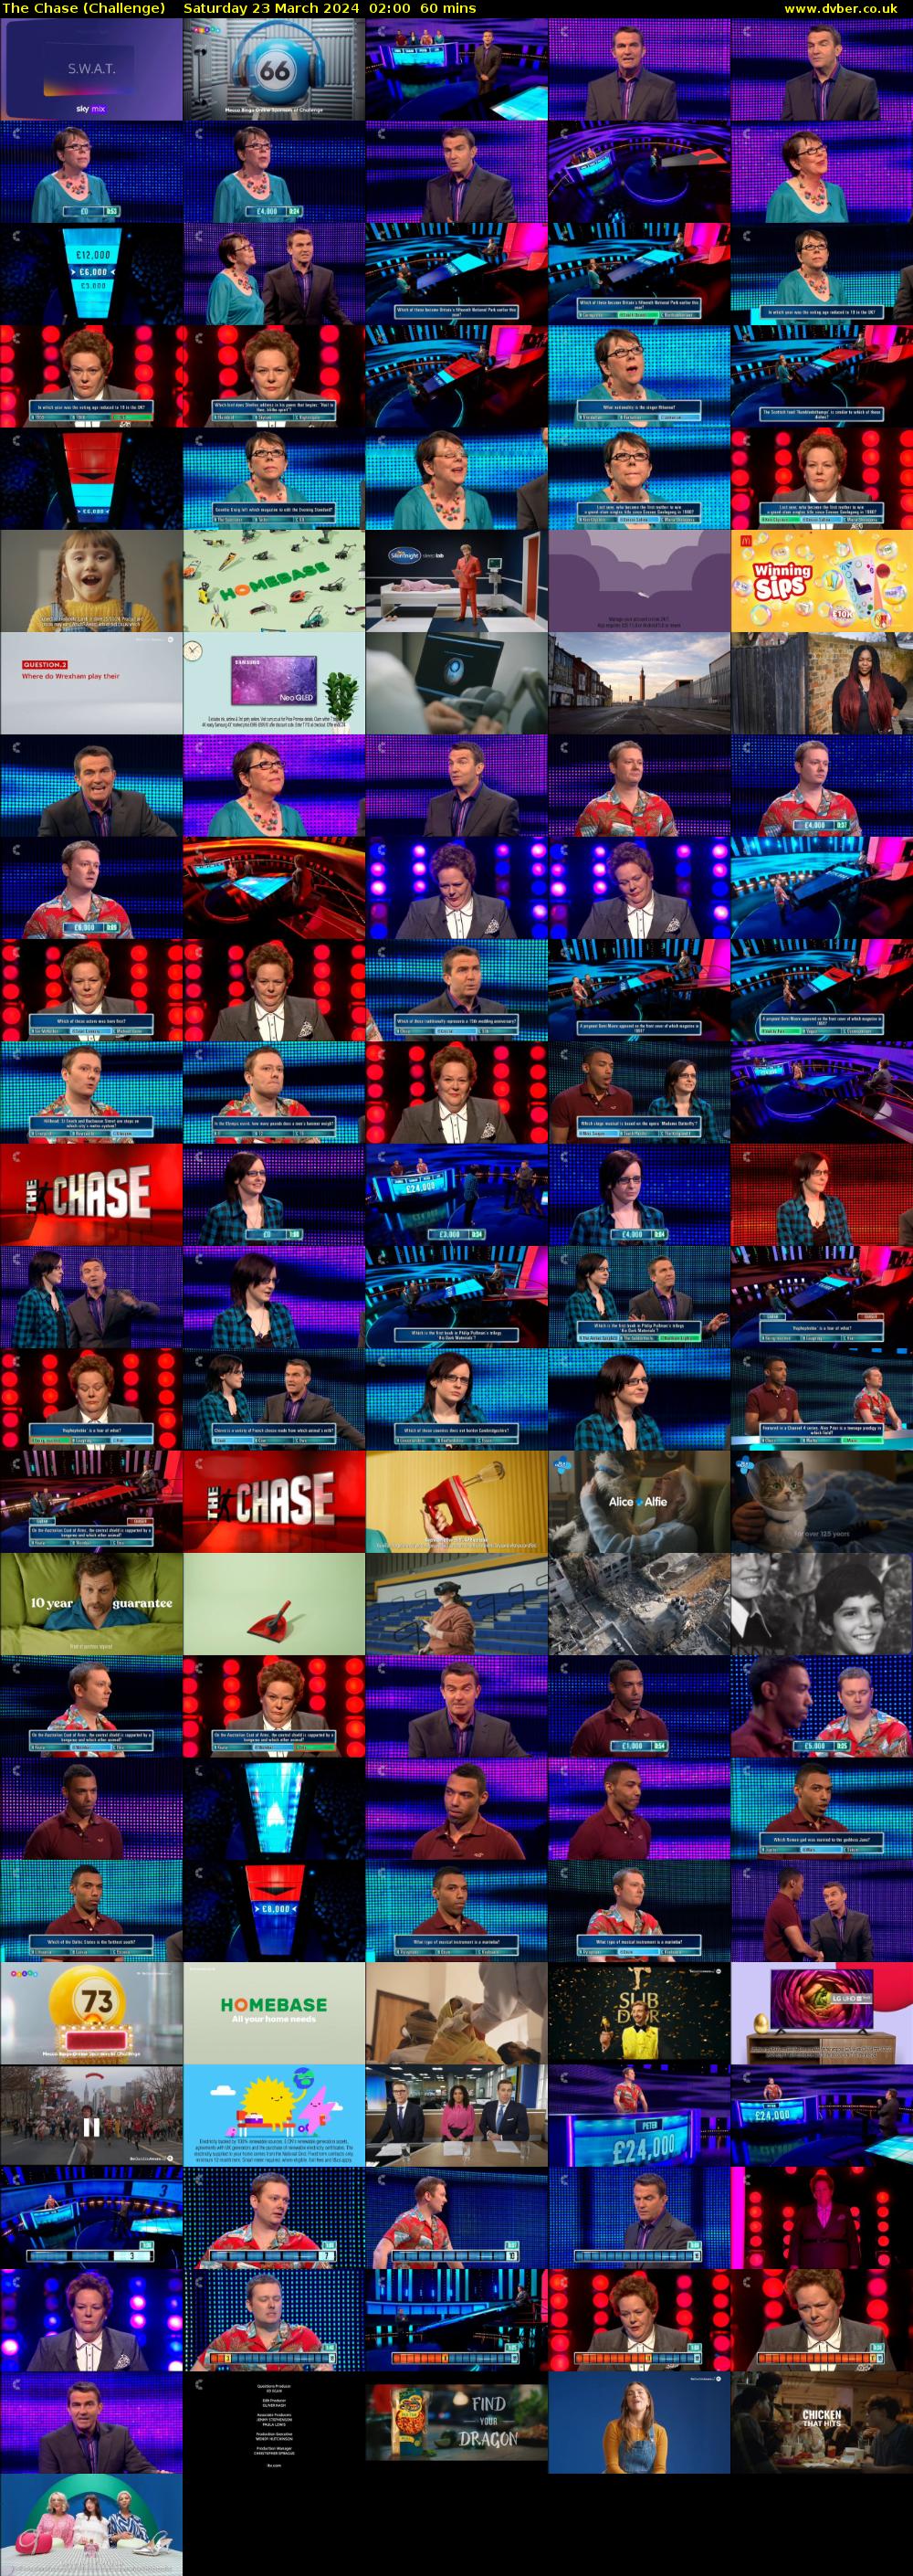 The Chase (Challenge) Saturday 23 March 2024 02:00 - 03:00